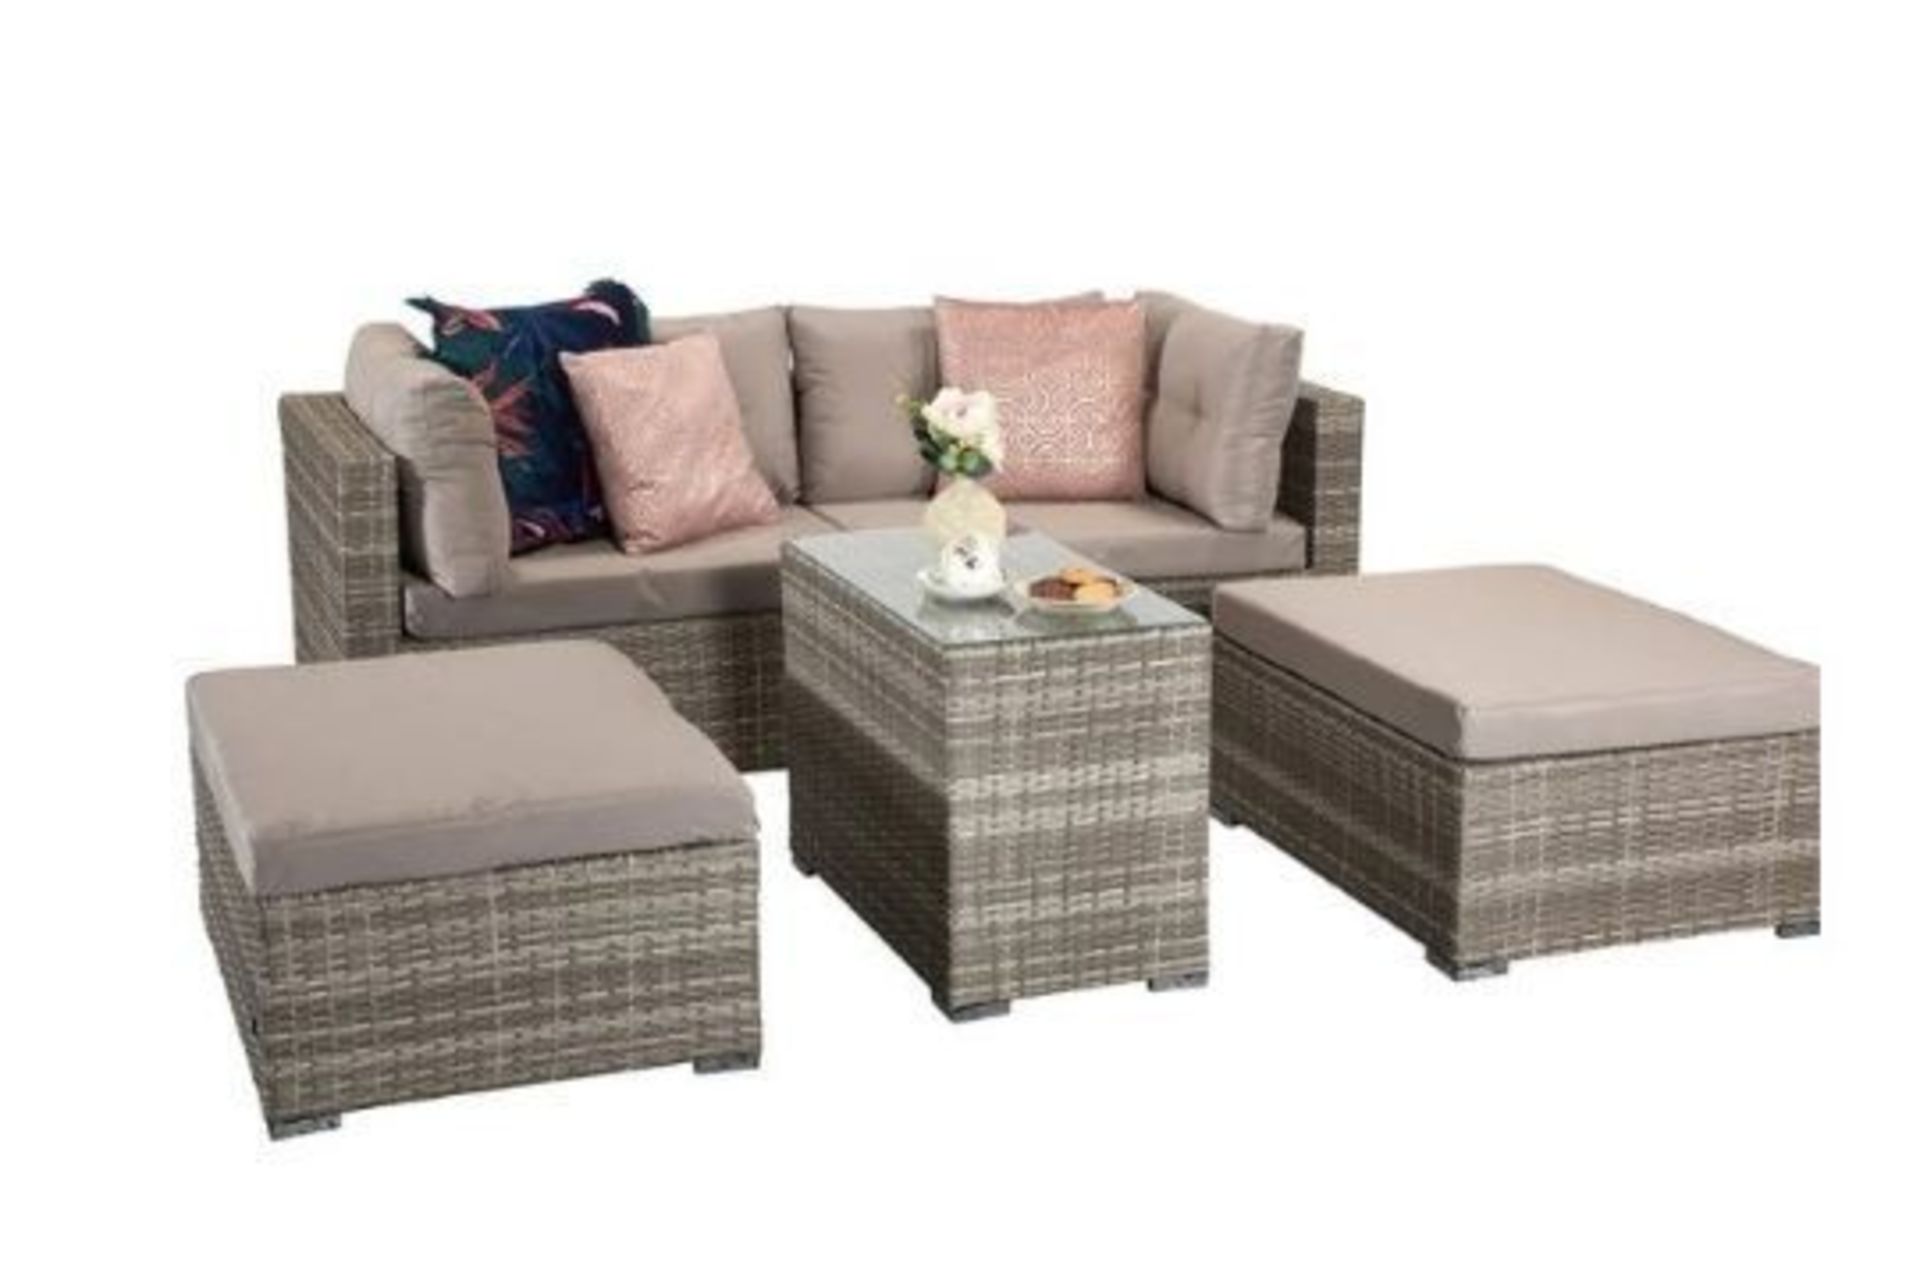 New & Boxed Luxury Signature Weave Garden UV Treated Rattan Harper Grey Stackable Multifunctional - Image 4 of 5